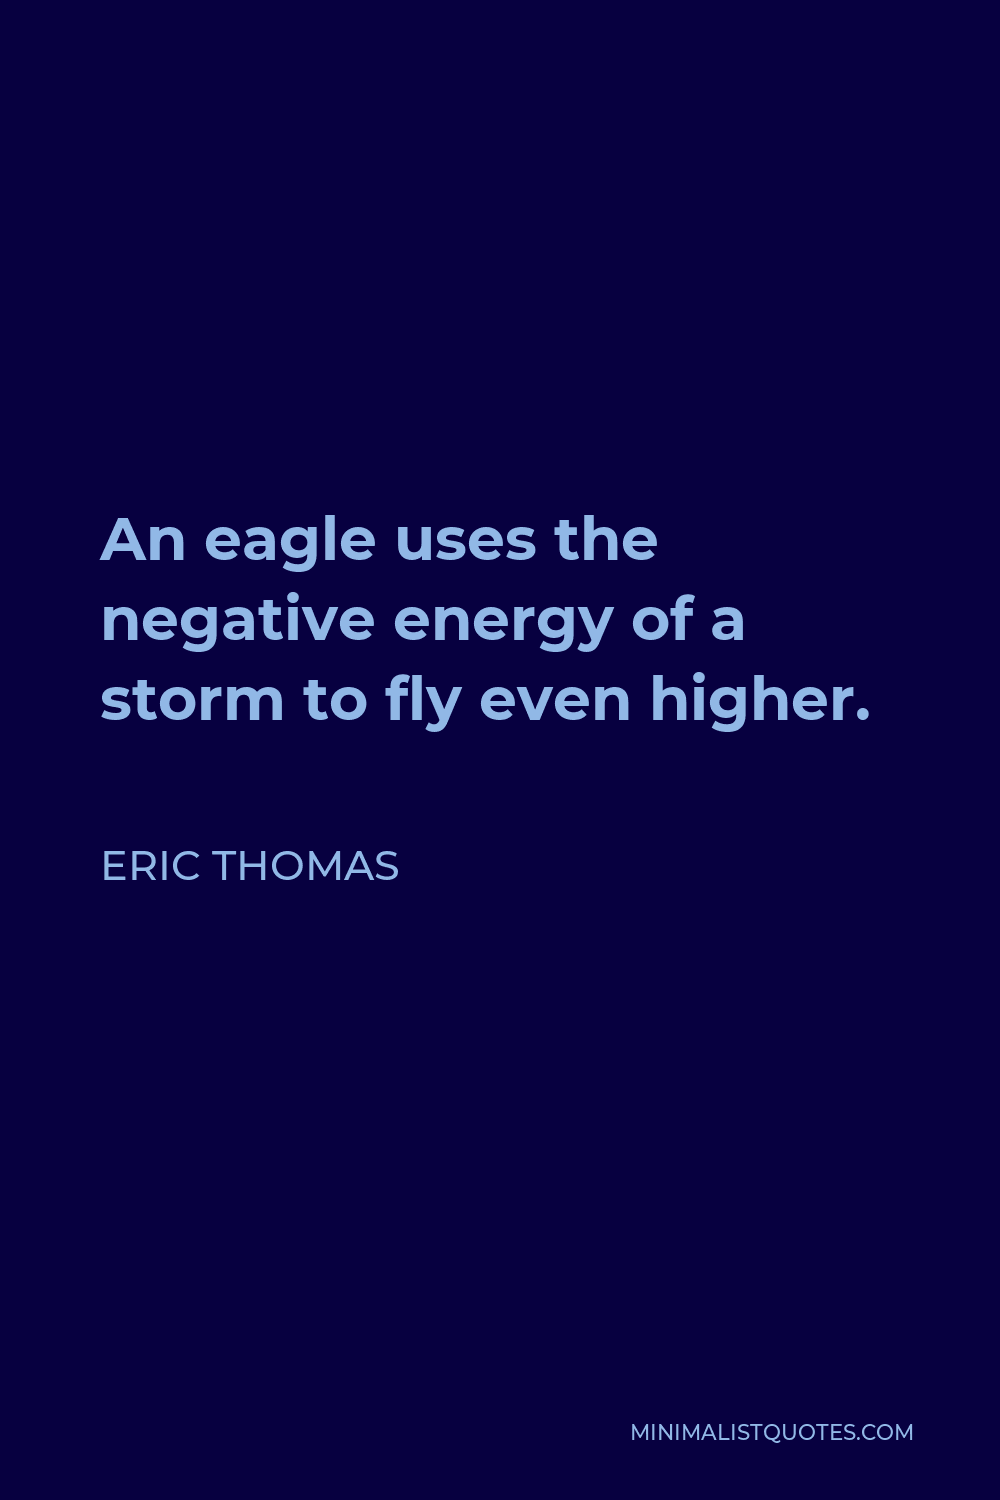 Eric Thomas Quote - An eagle uses the negative energy of a storm to fly even higher.